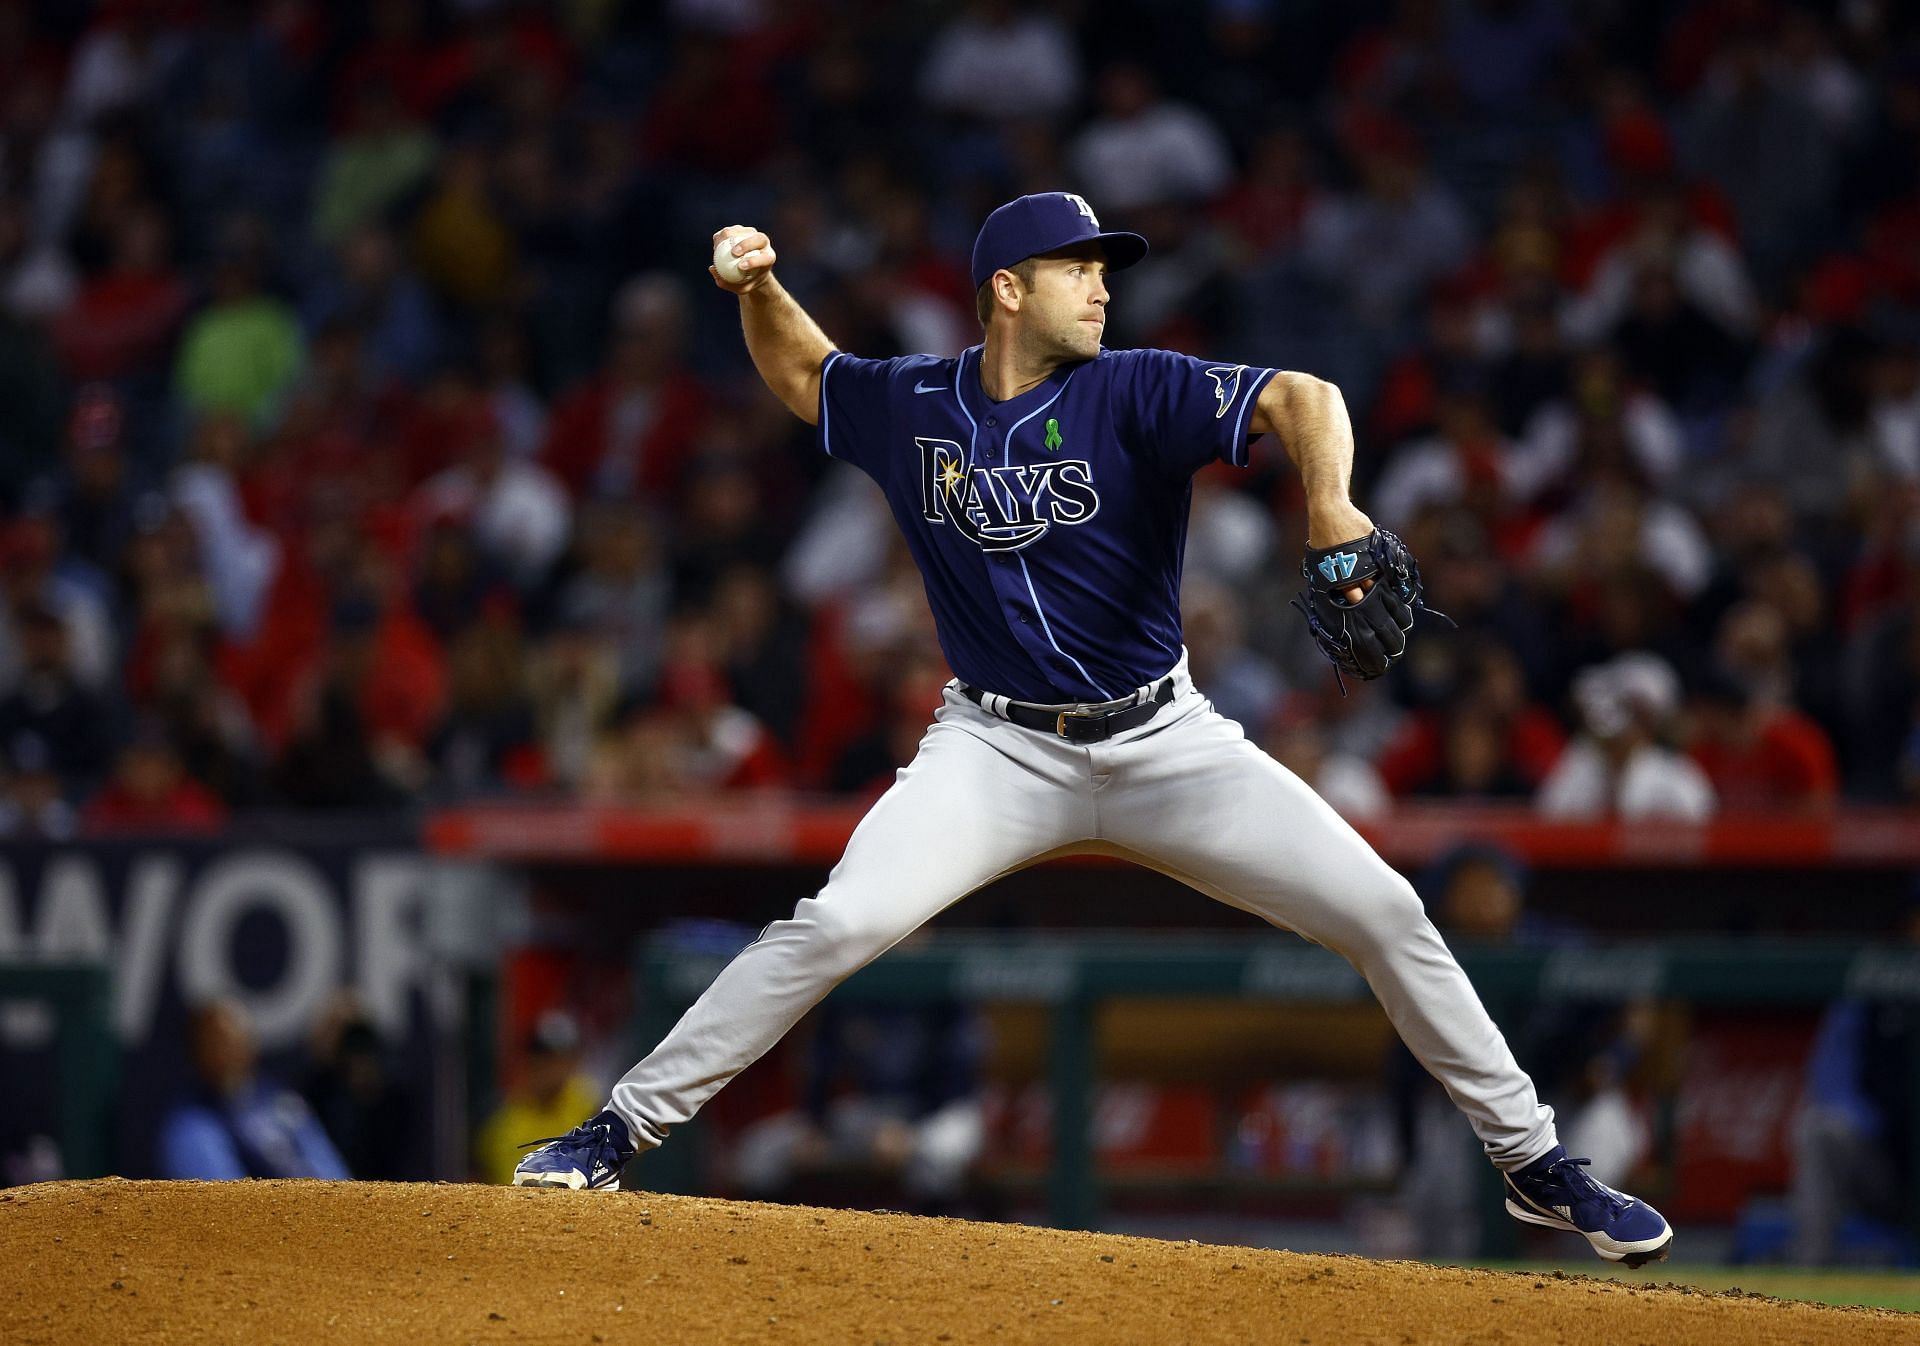 Tampa Bay Rays Players Decline To Wear Rainbow Logos For Pride Night.  Pitcher Cites Jesus.